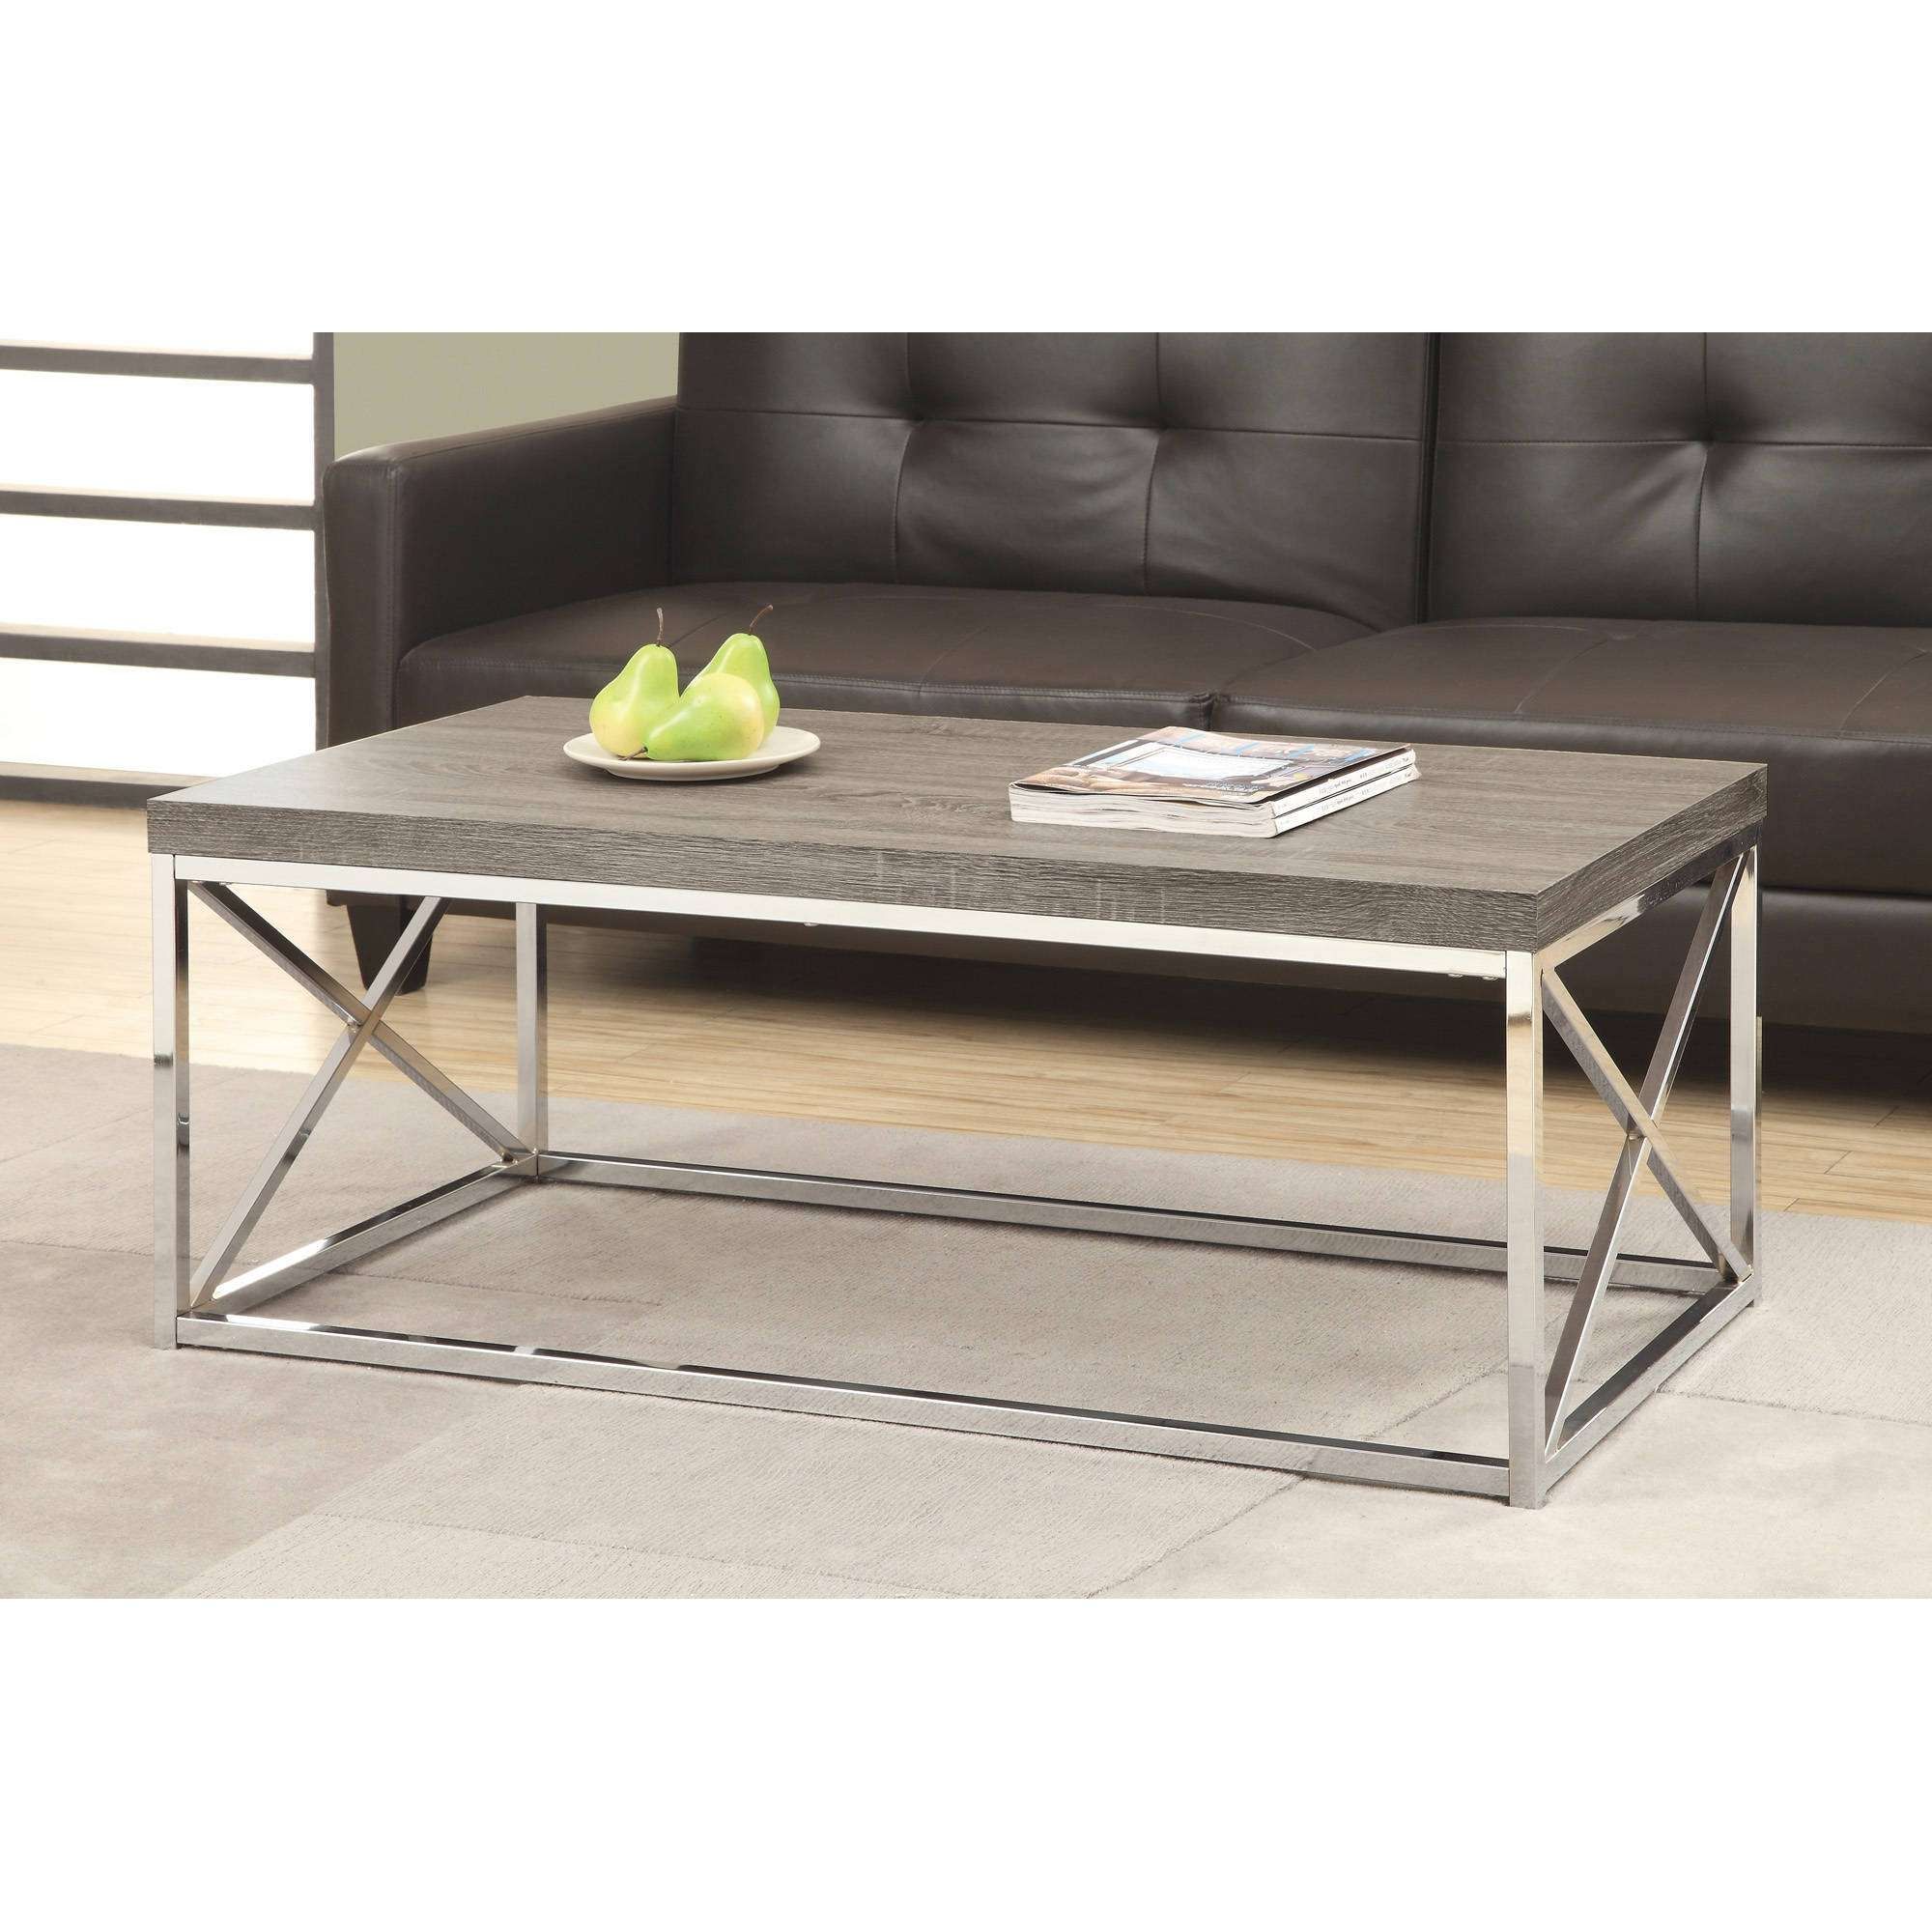 Newest Wood Chrome Coffee Tables Throughout Coffee Tables : Pe Perspective Coffee Table Xl Chrome And Wood (View 2 of 20)